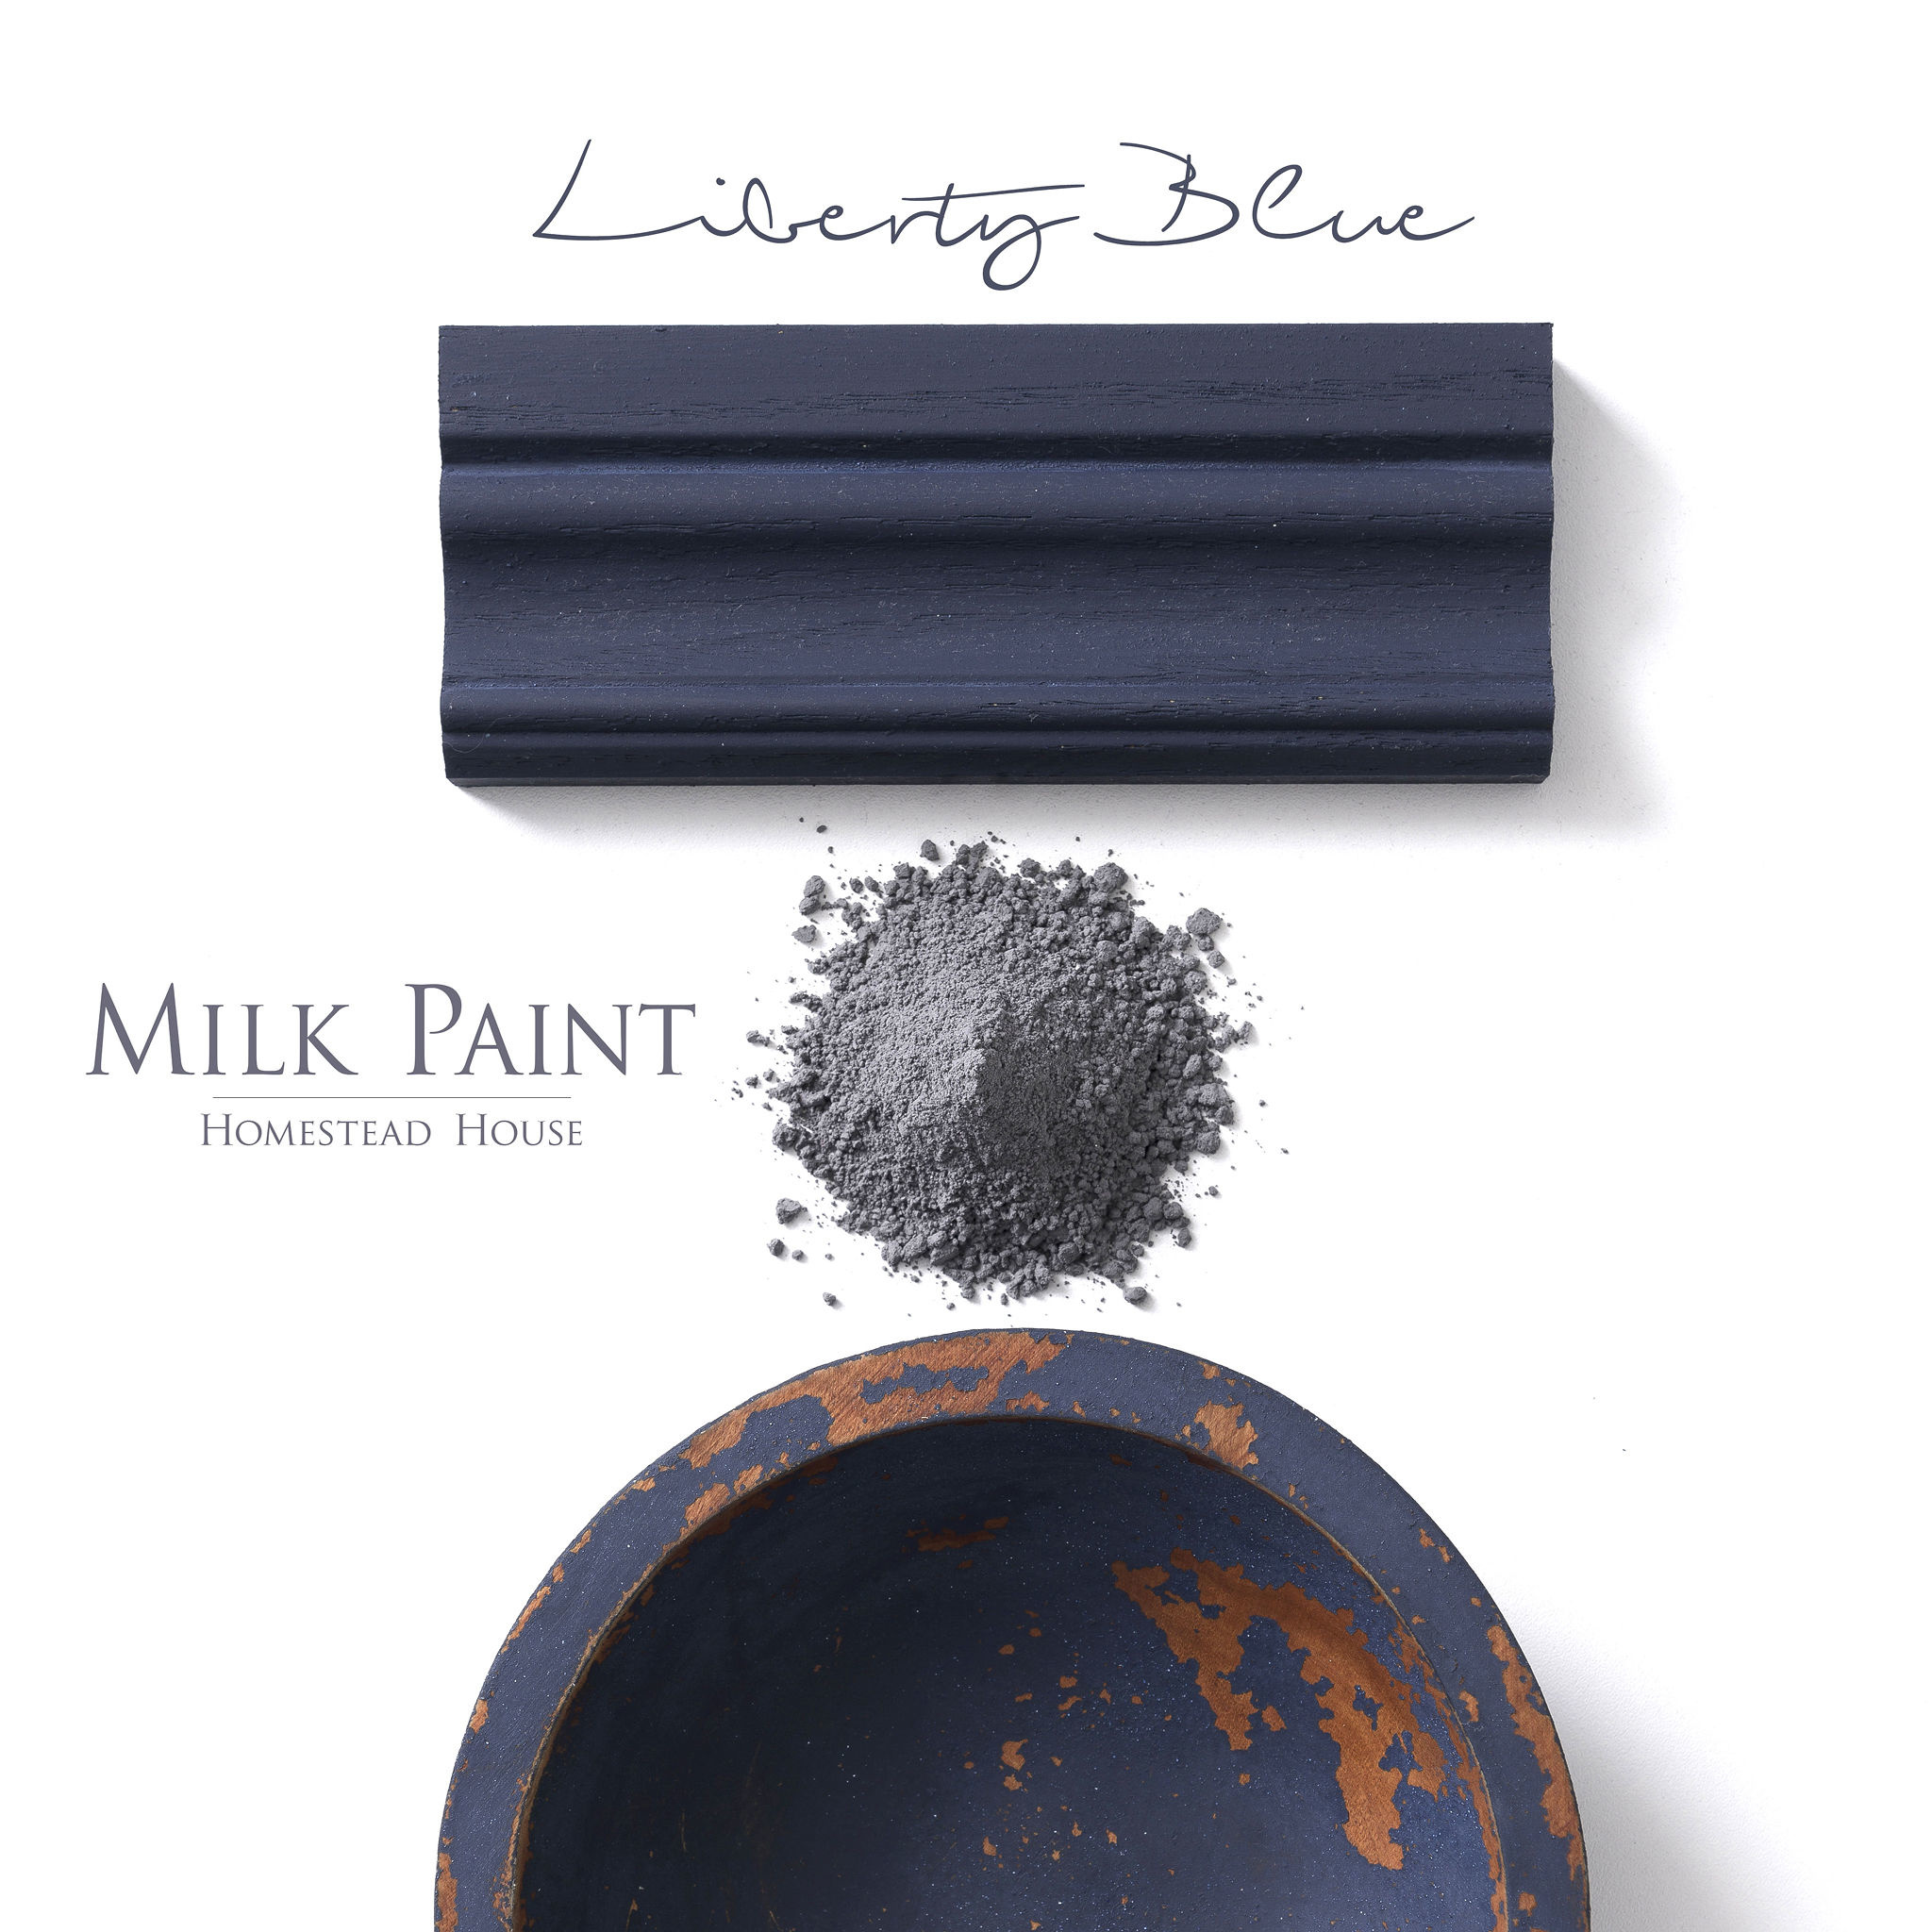 All About Milk Paint - This Old House